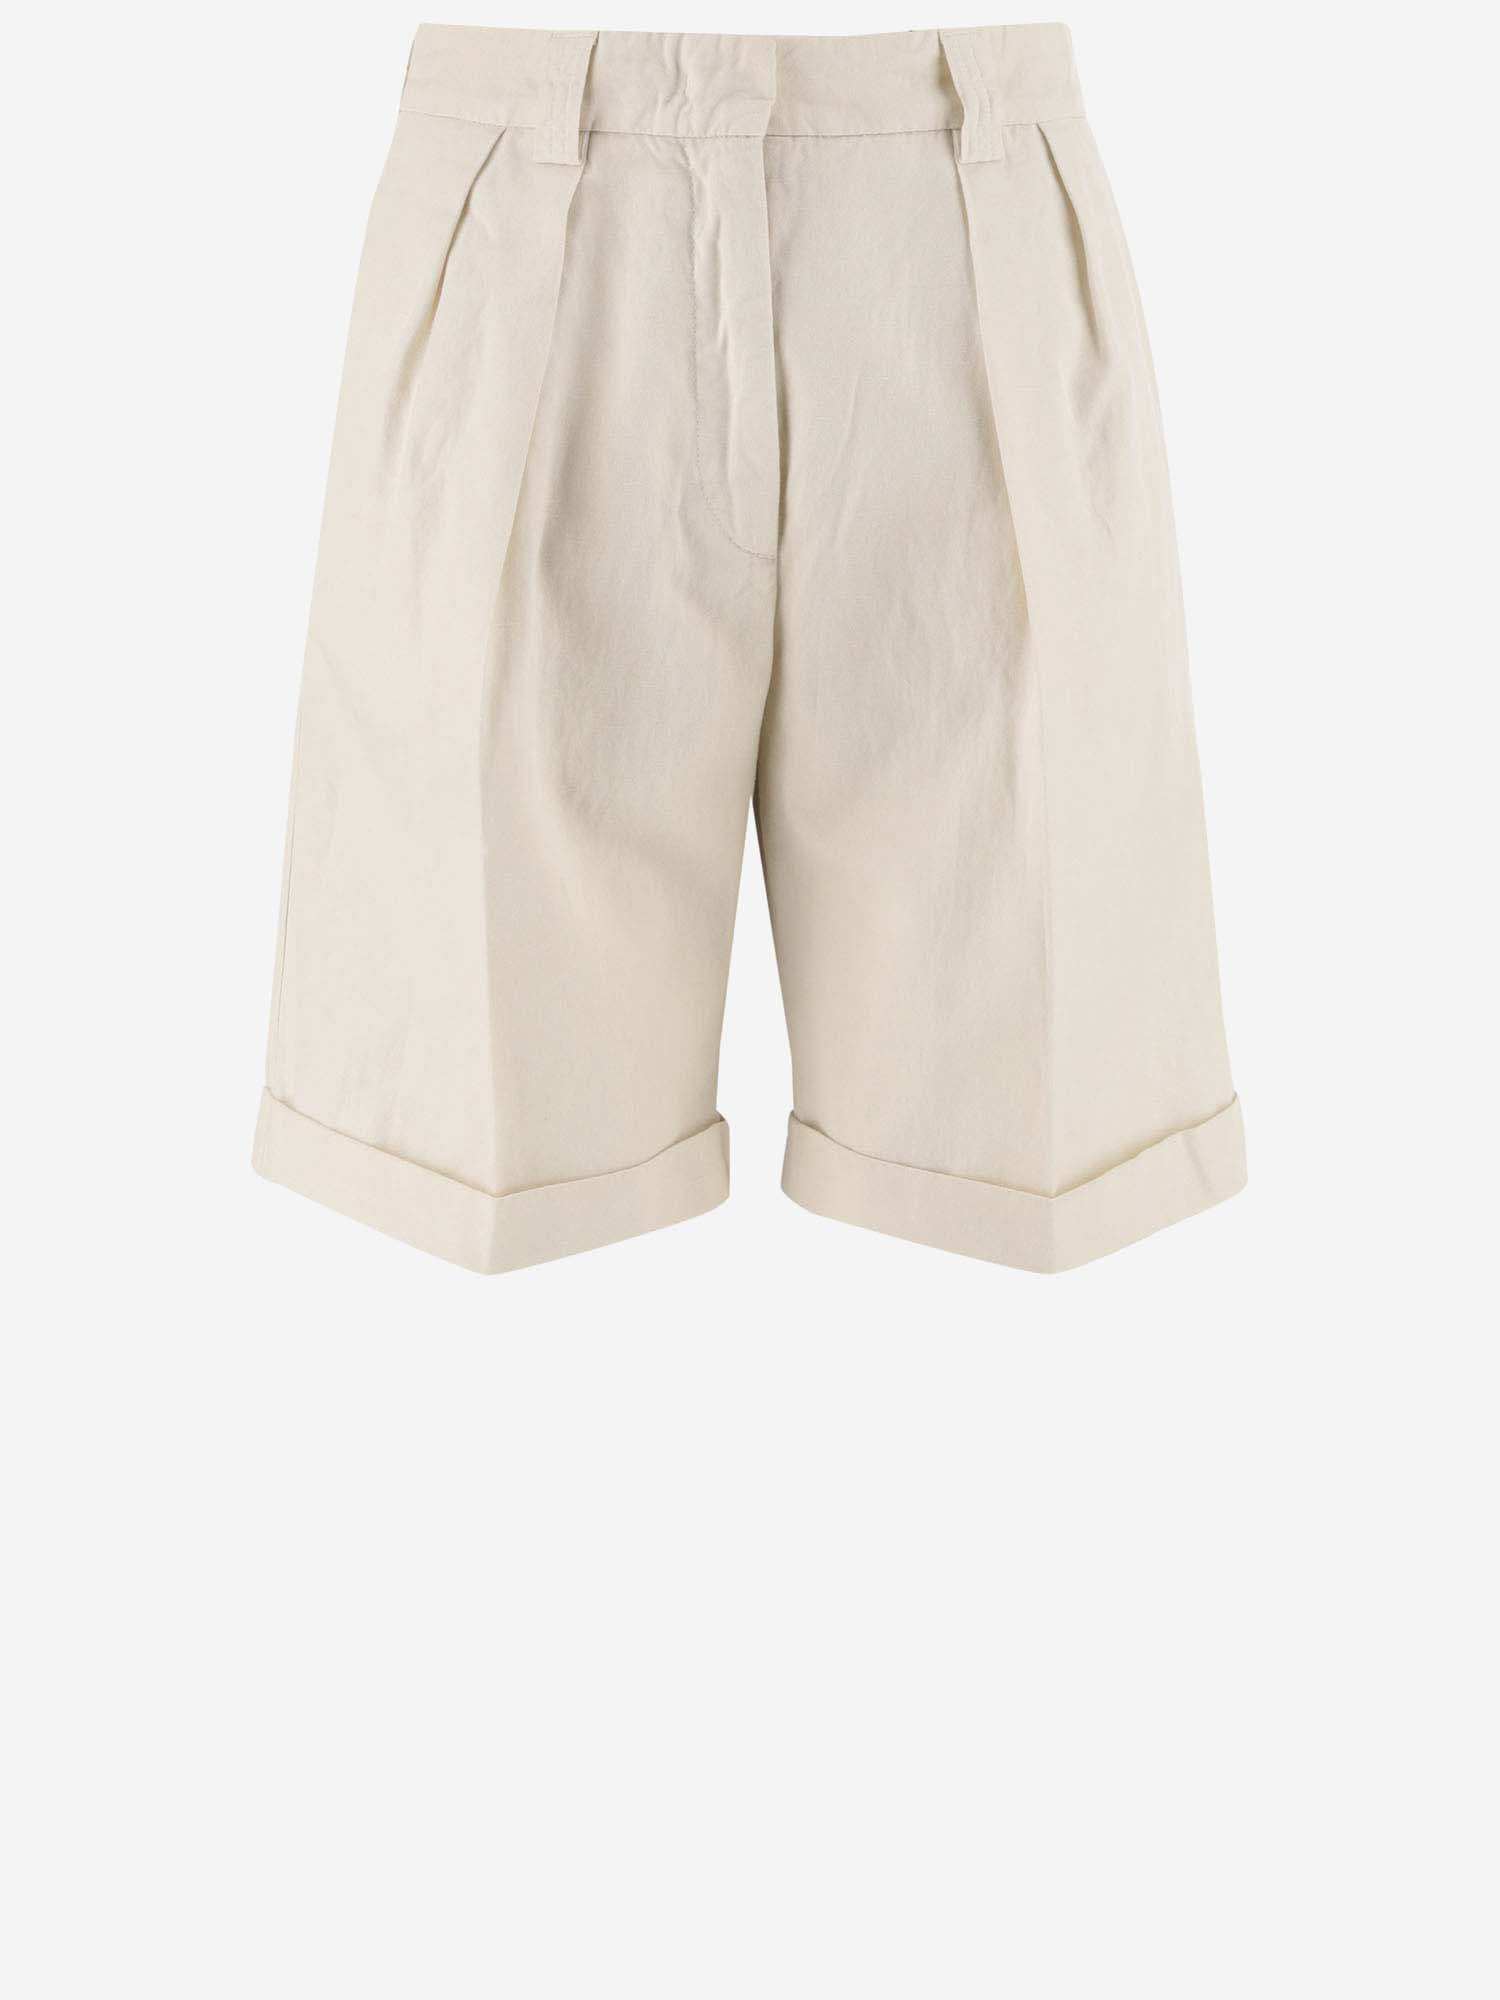 Aspesi Cotton And Linen Short Pants In Natural